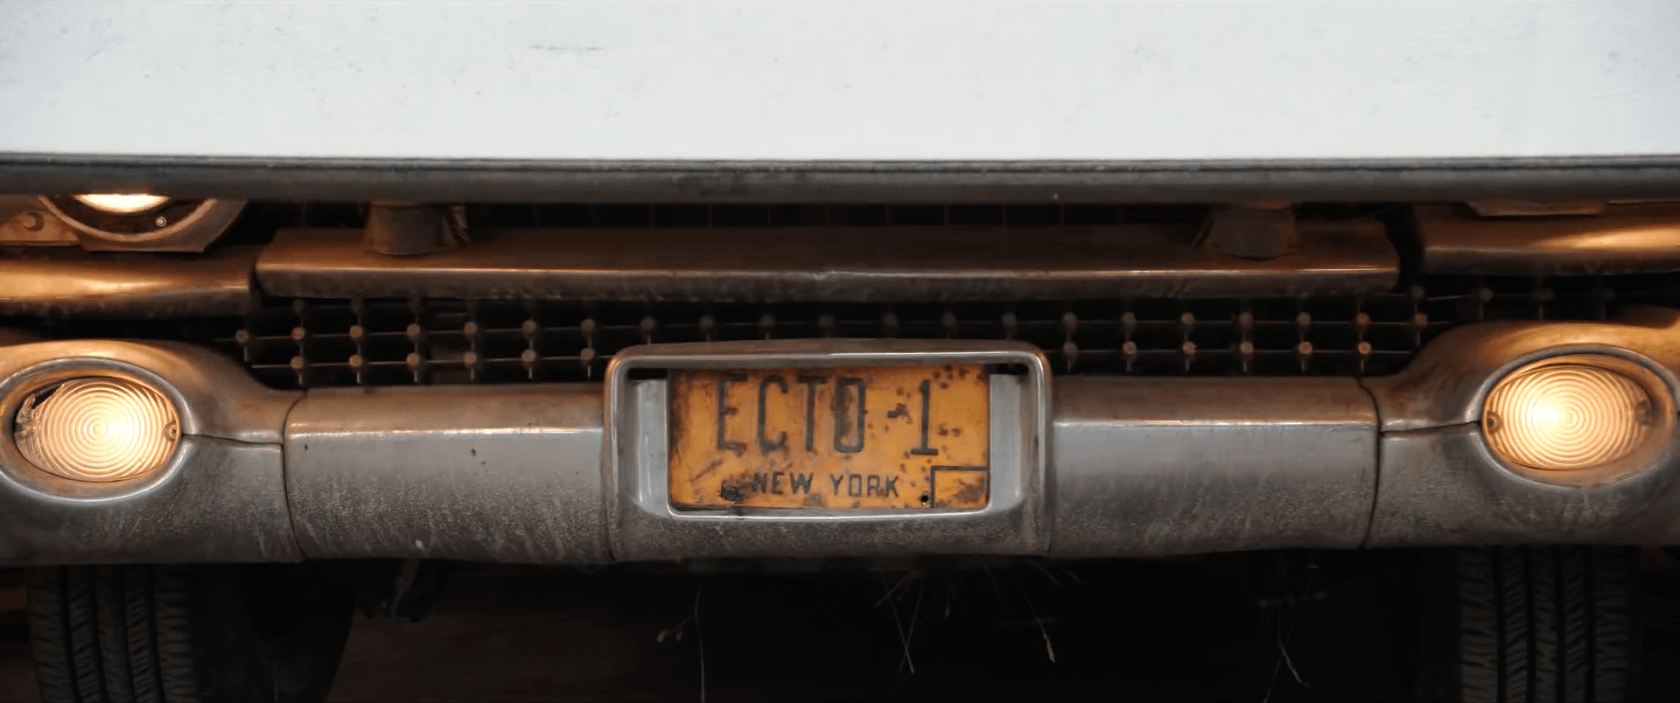 GhostbustersAfterlife_Ecto1Plate